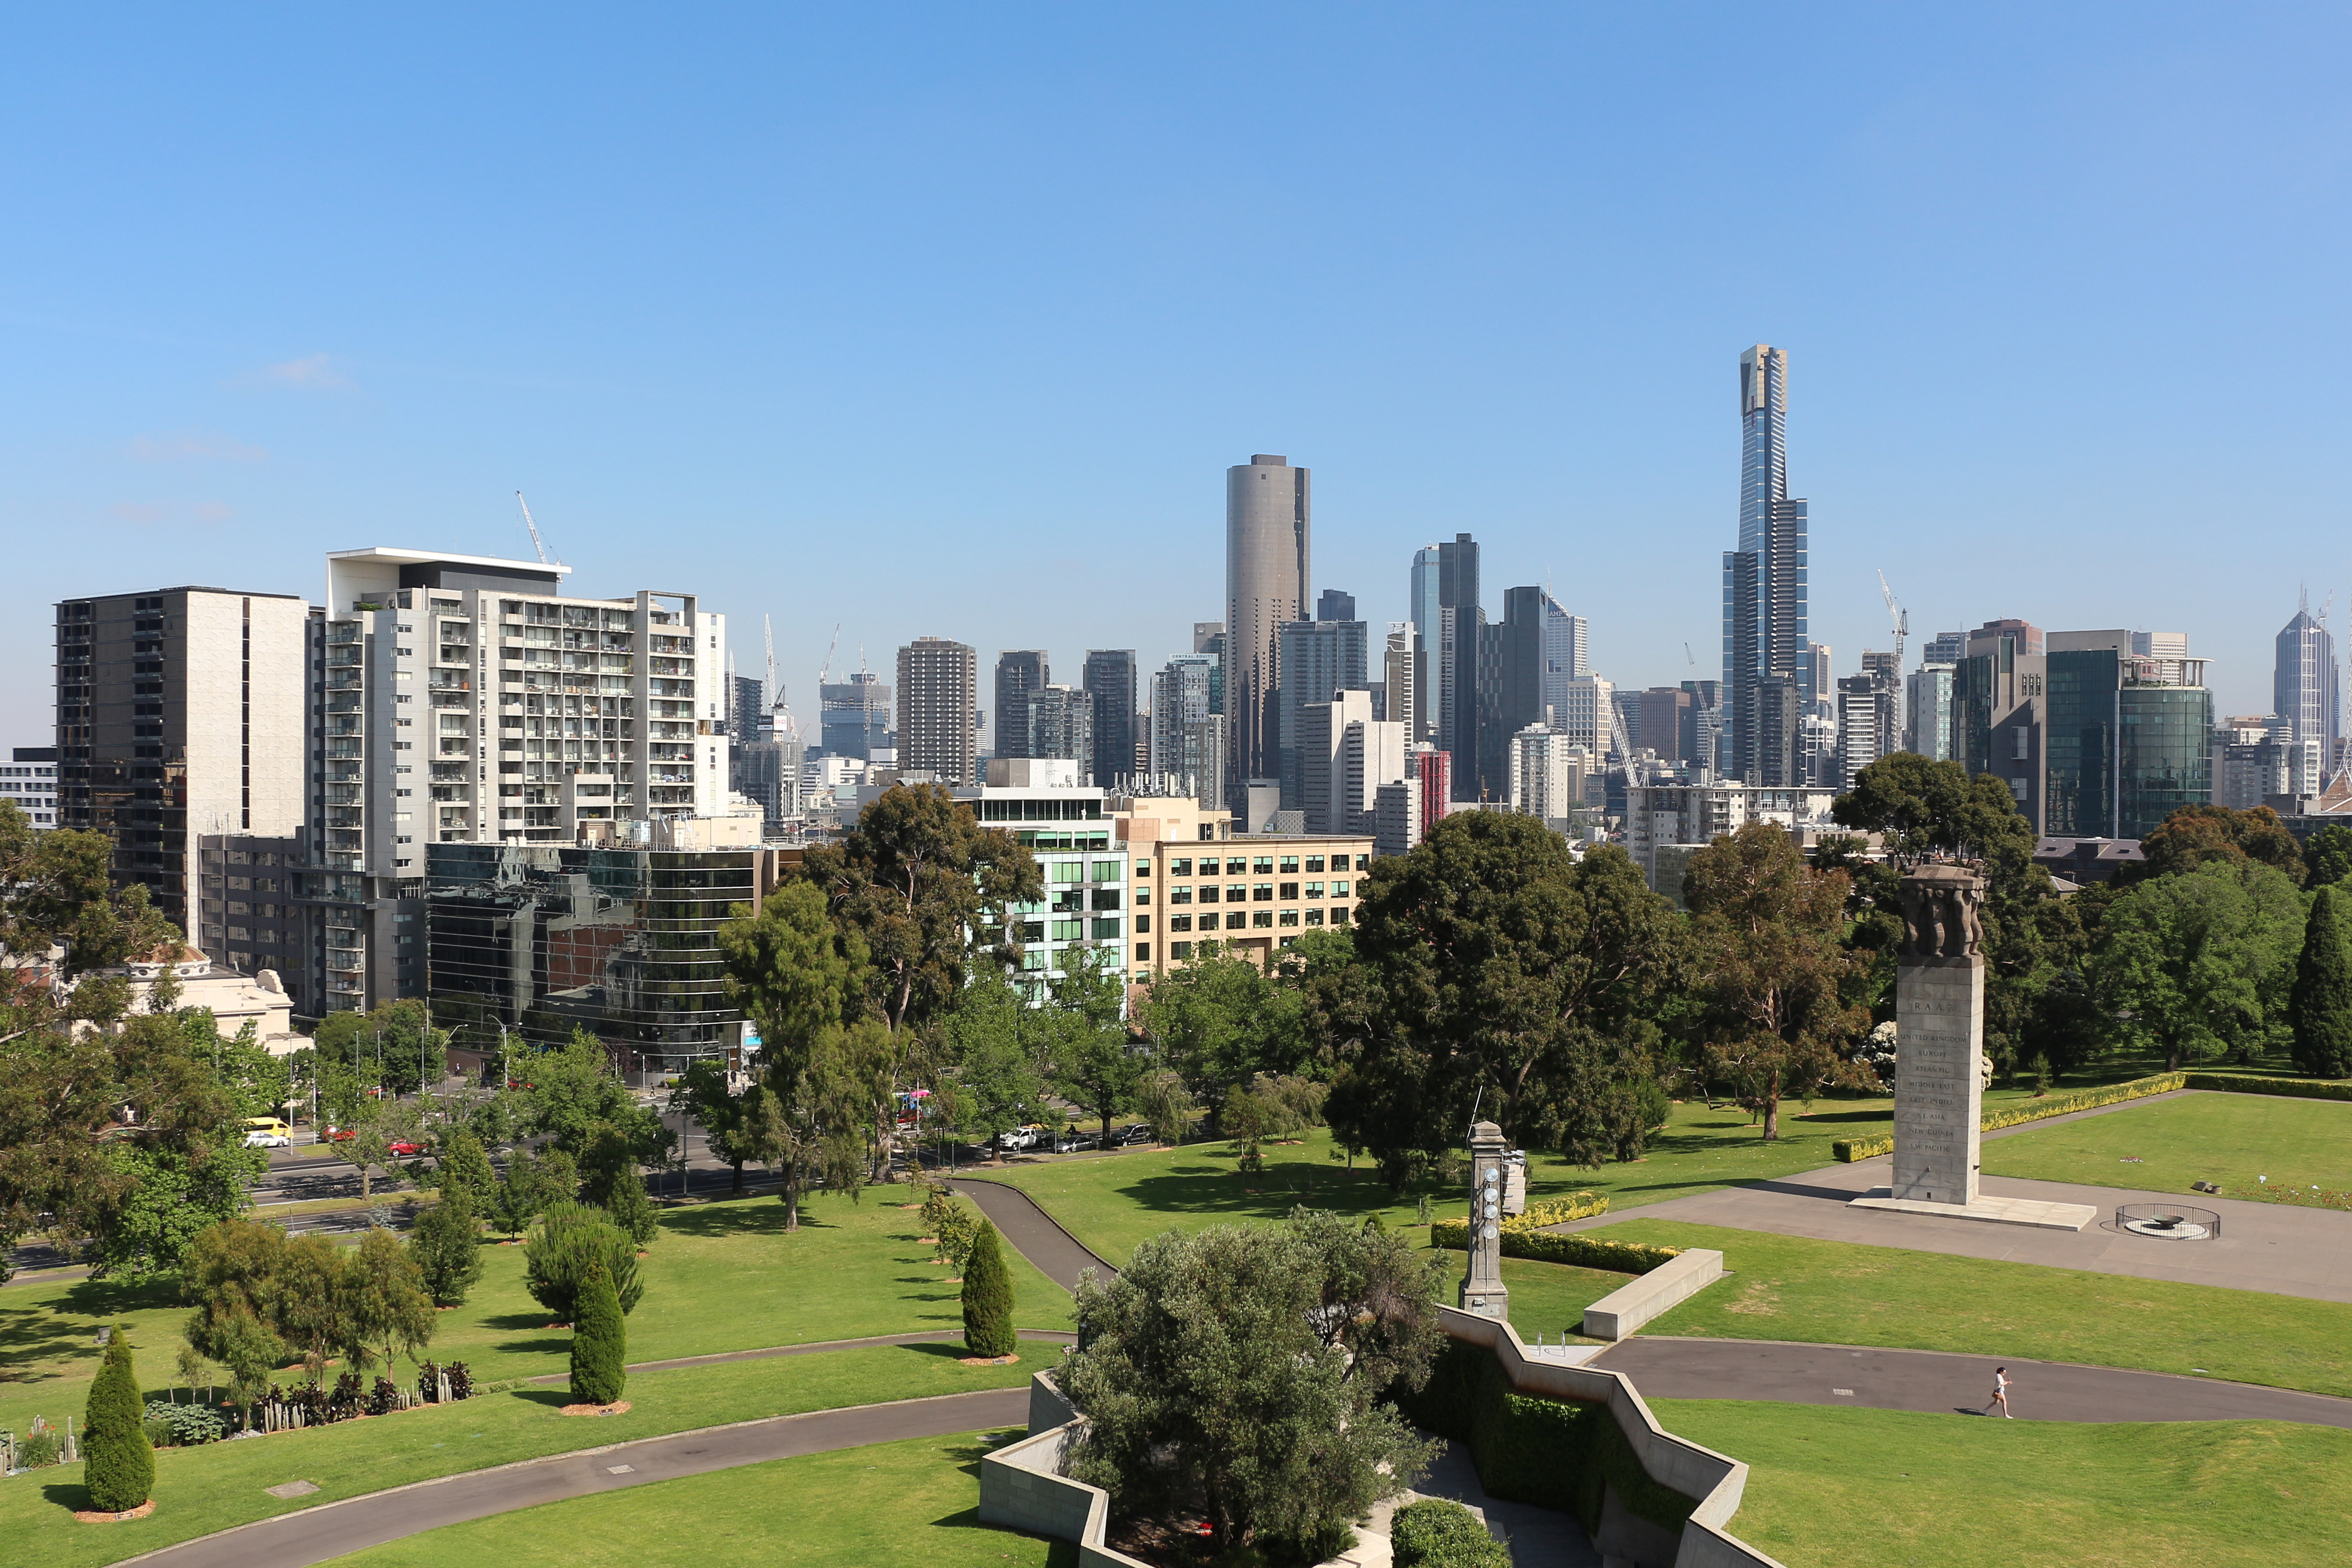 Shrine of Remembrance - View of Melbourne